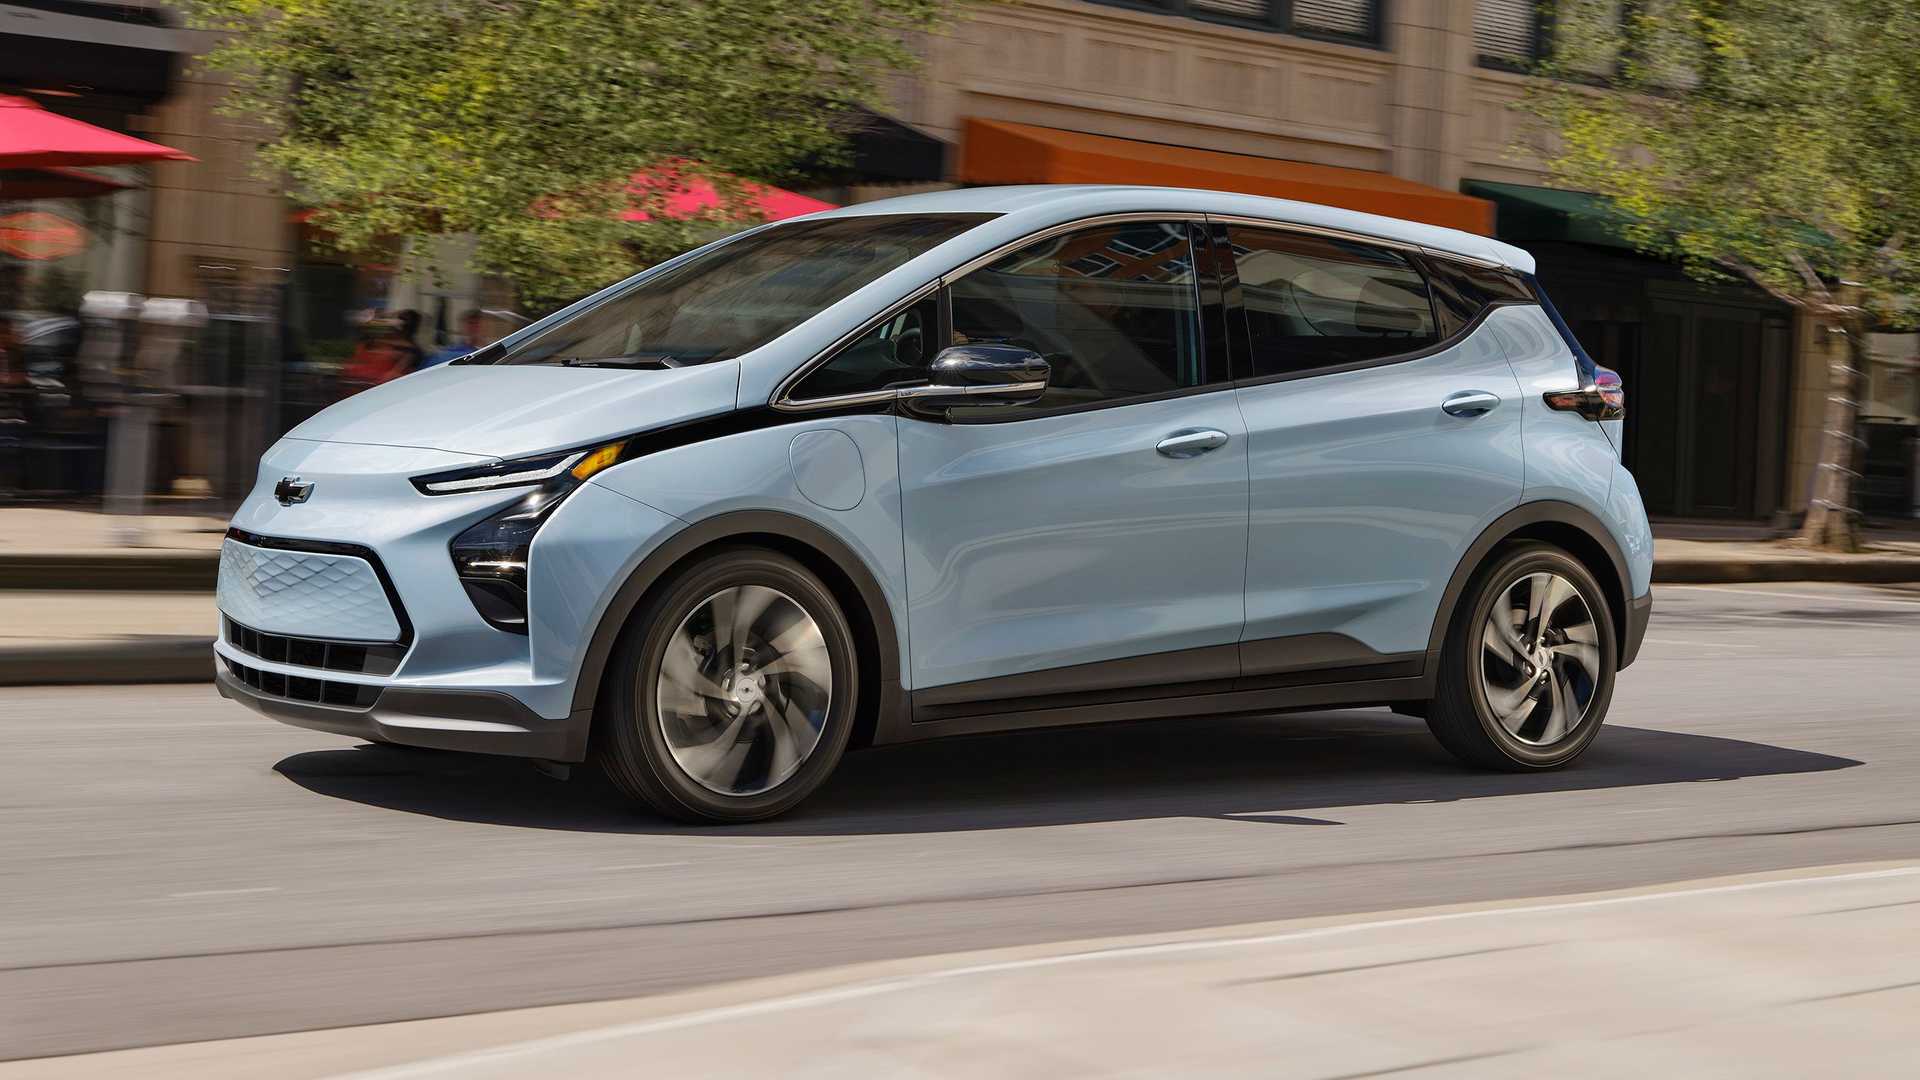 Chevrolet Bolt offers great discounts on family electric cars up to $ 6,300